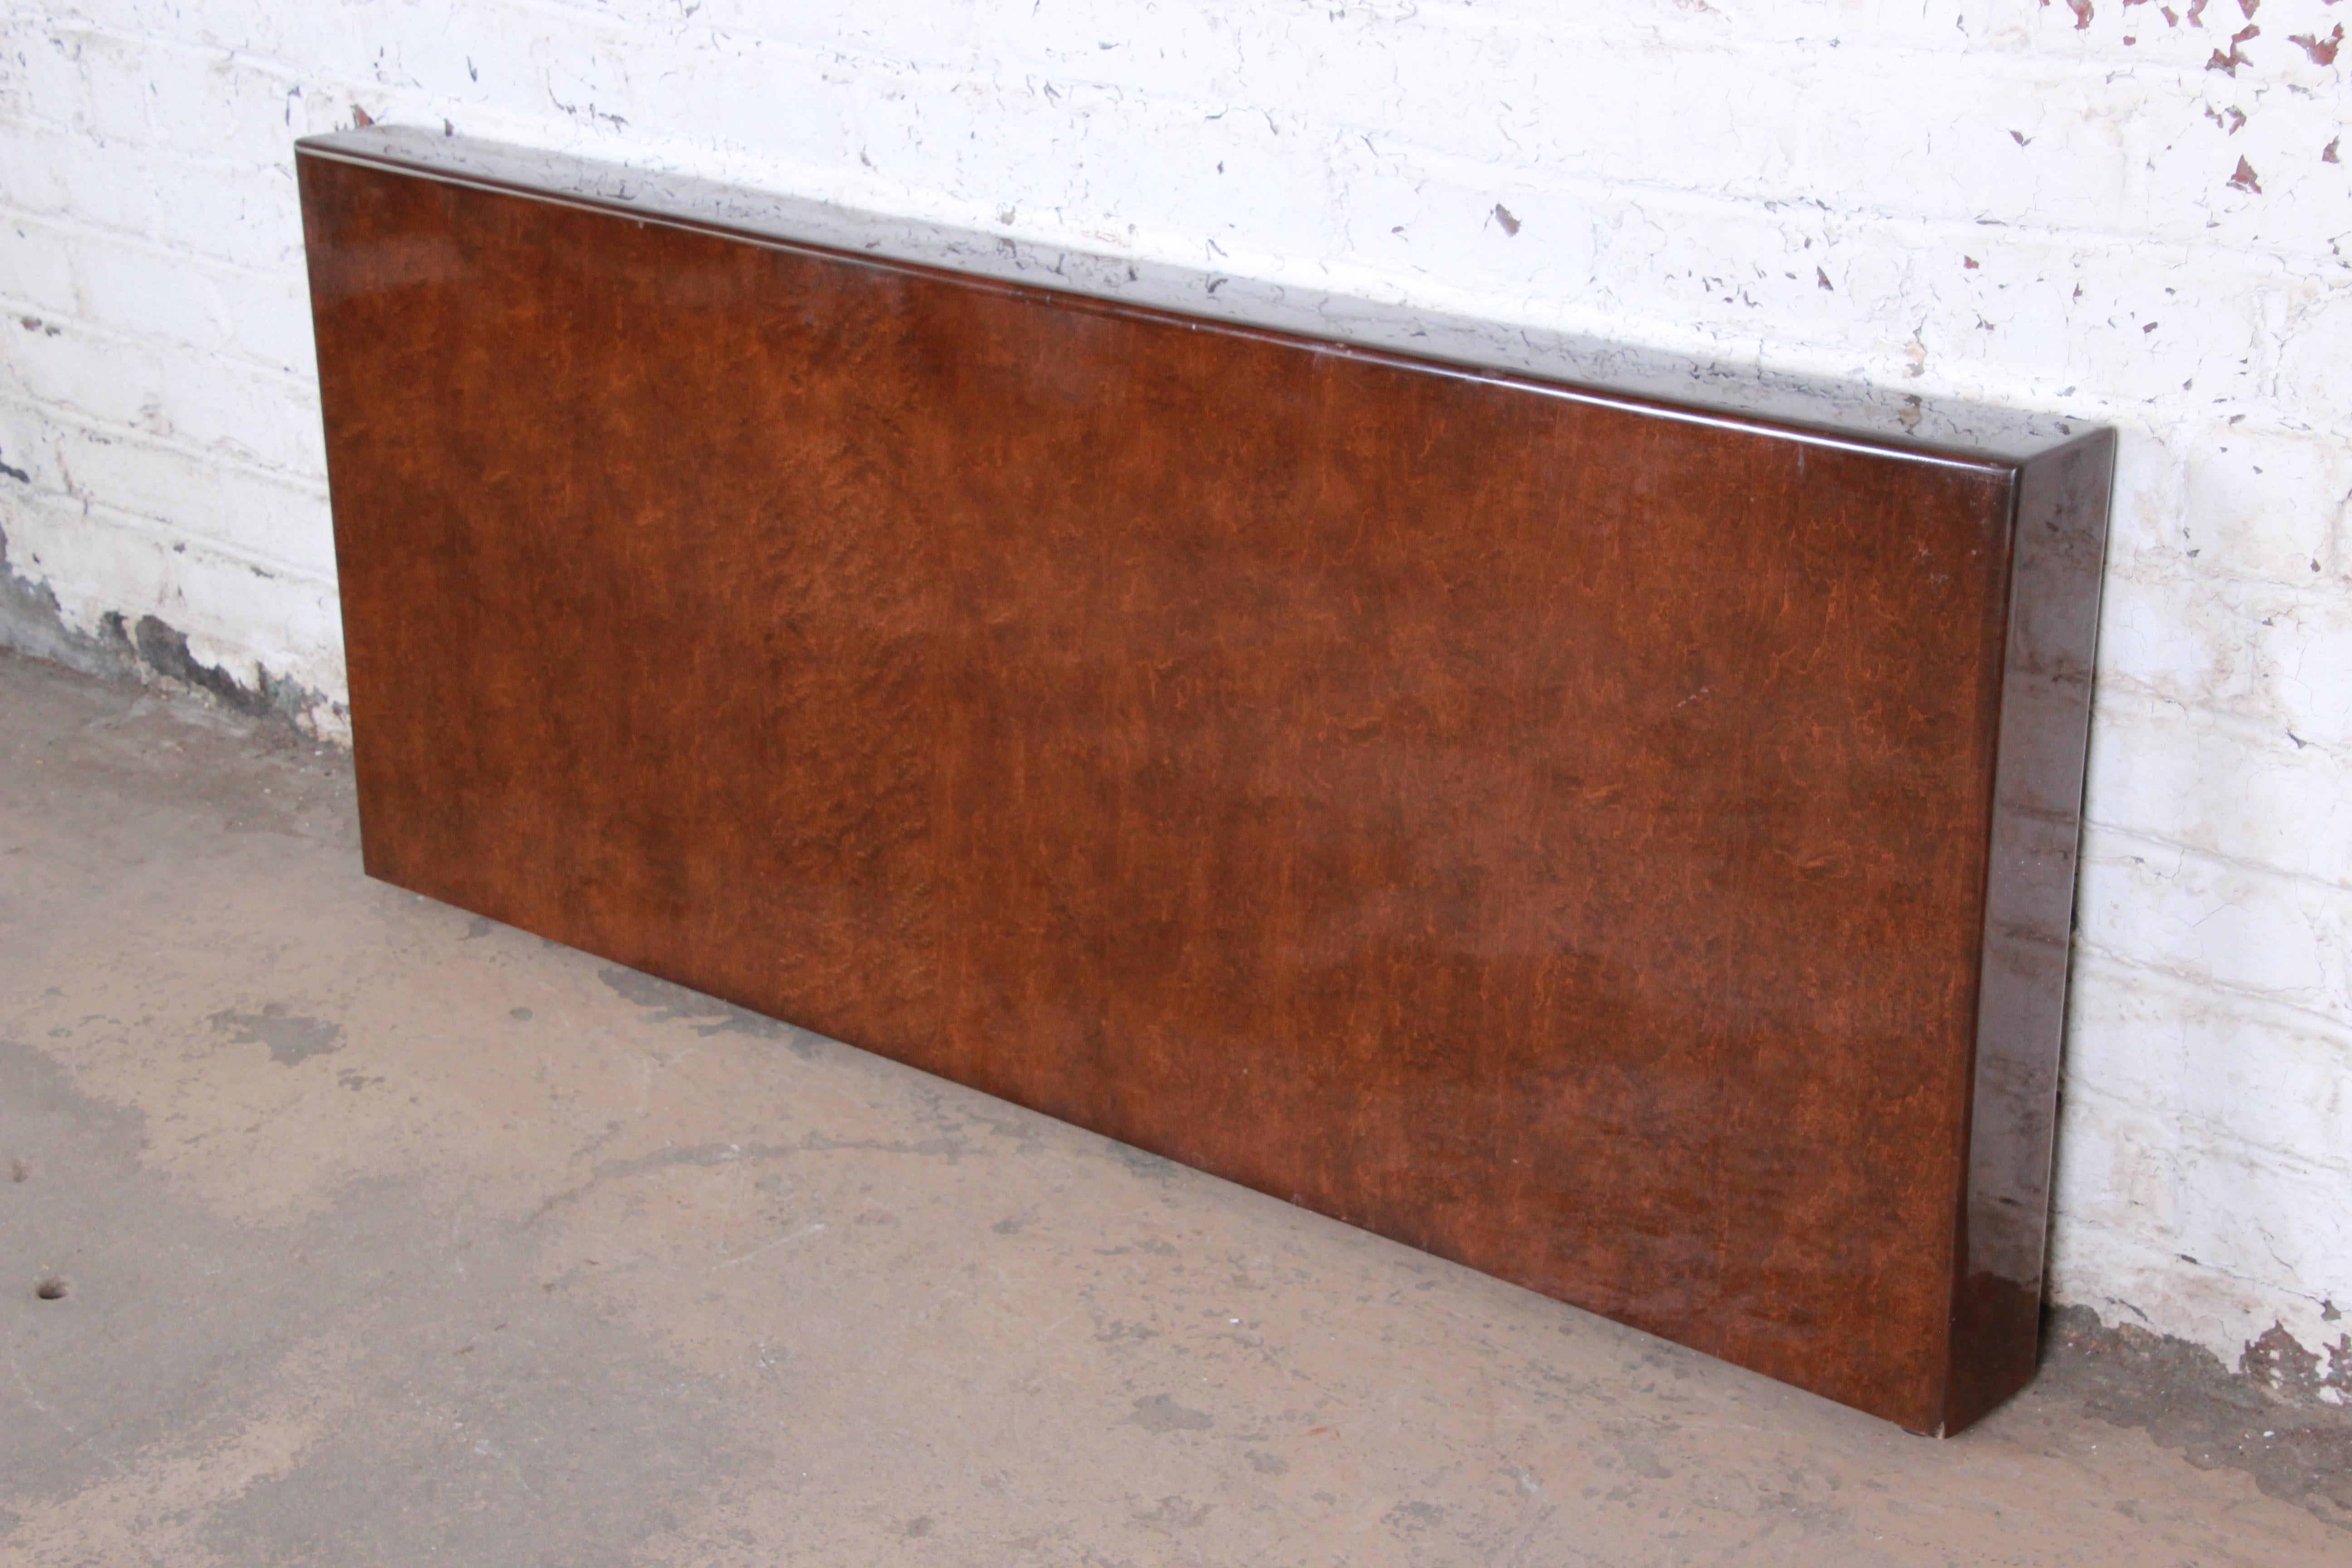 A gorgeous Mid-Century Modern queen size headboard designed by Milo Baughman for Thayer Coggin, circa 1970s. The headboard features stunning burled bird's-eye maple grain and sleek, Minimalist design. Previous owner mounted to the wall as a floating